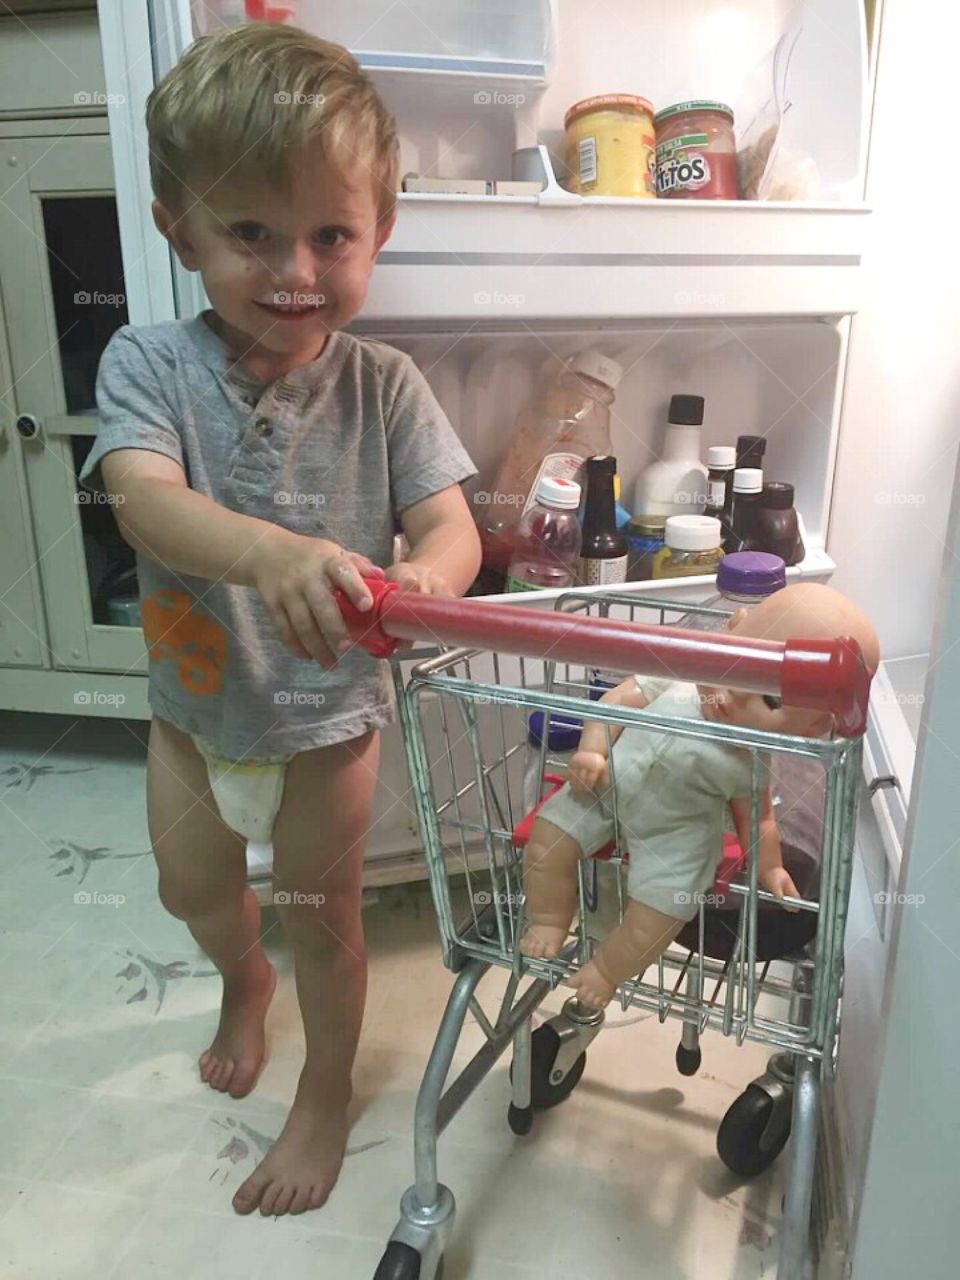 Little boy taking his baby shopping out of the refrigerator. 